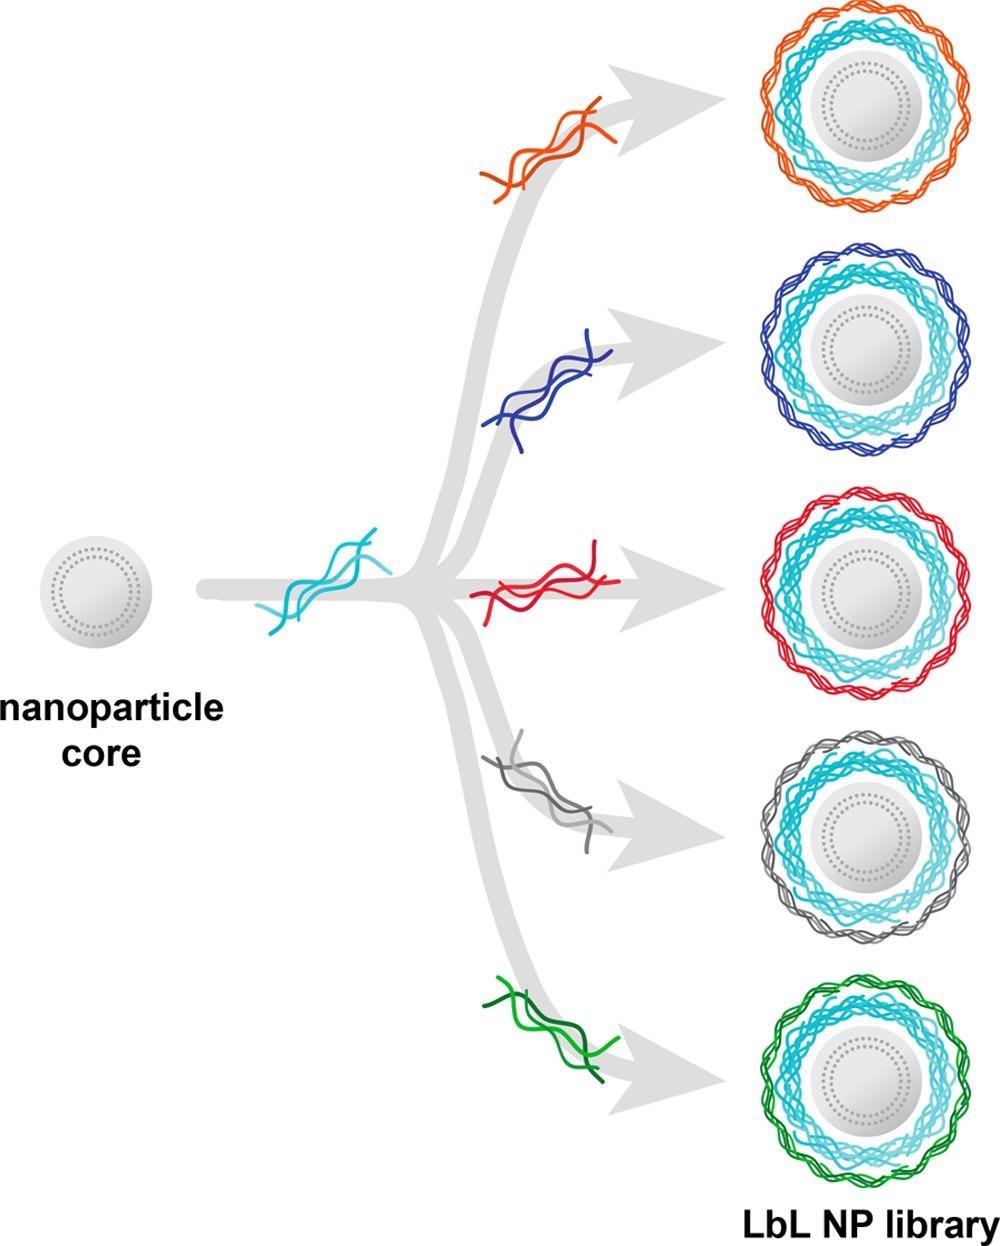 Layer-by-layer assembly enables the generation of nanocarrier libraries wherein one component is varied while all others are kept constant. Illustrated here is an example of a common nanoparticle core and polyelectrolyte layer being separately coated with a range of polyanions to generate a nanocarrier library focused on evaluating surface chemistry effects.